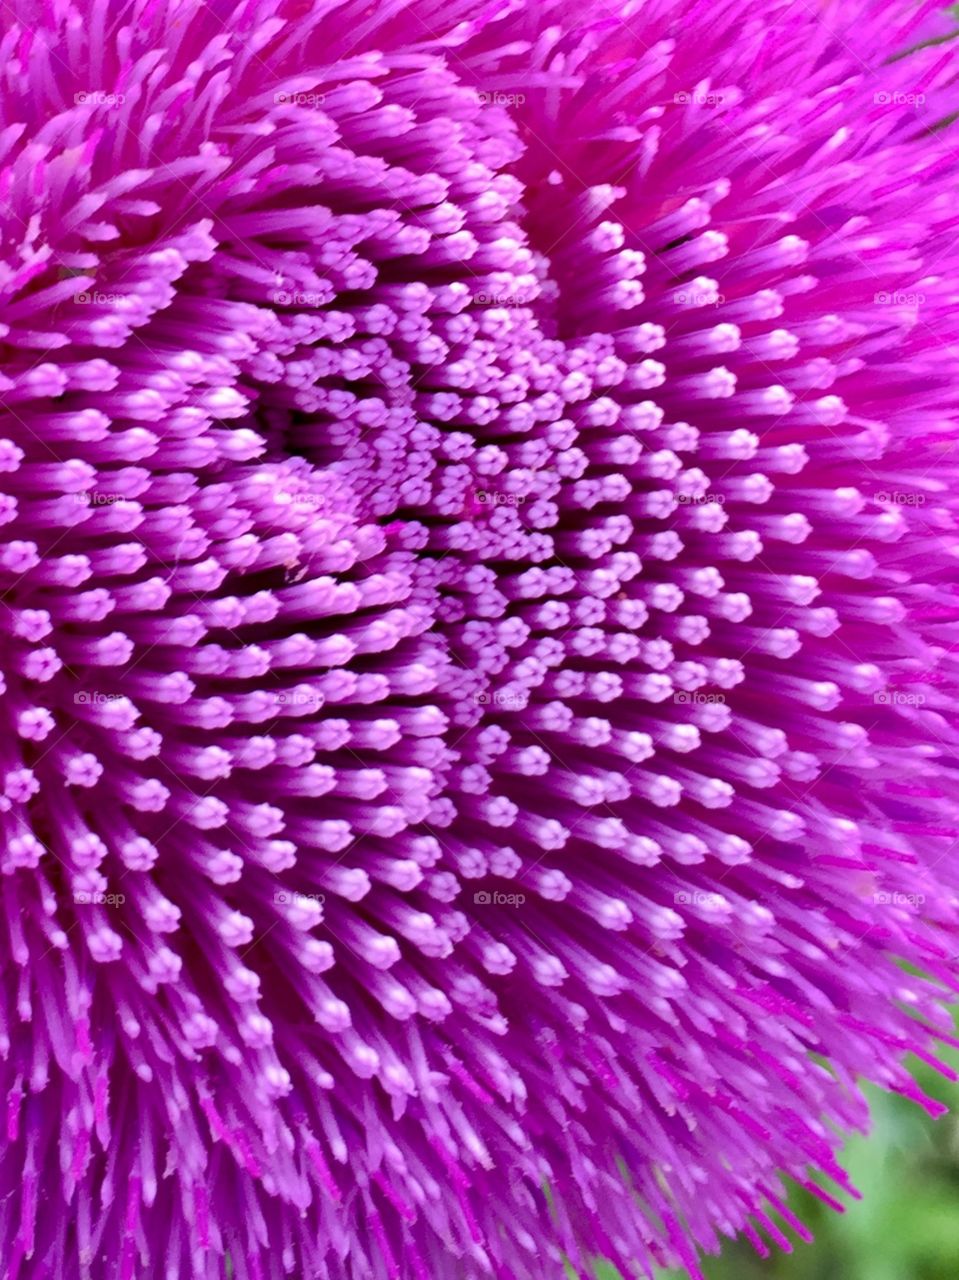 Isolated closeup of a milk thistle flower head